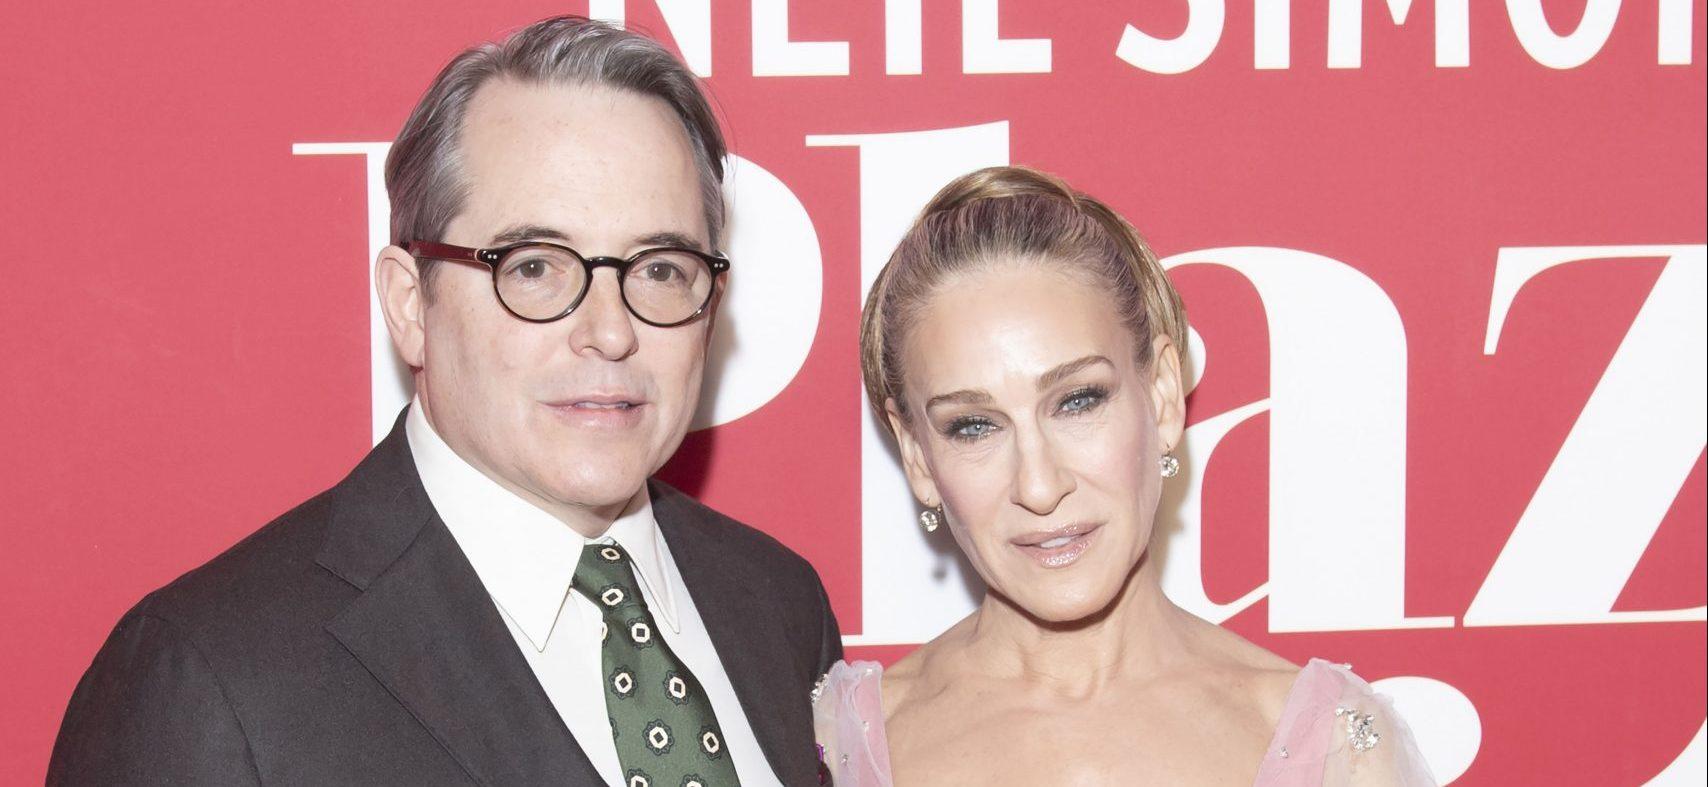 Sarah Jessica Parker Marks 26th Marriage Anniversary With Loving Tribute To Matthew Broderick